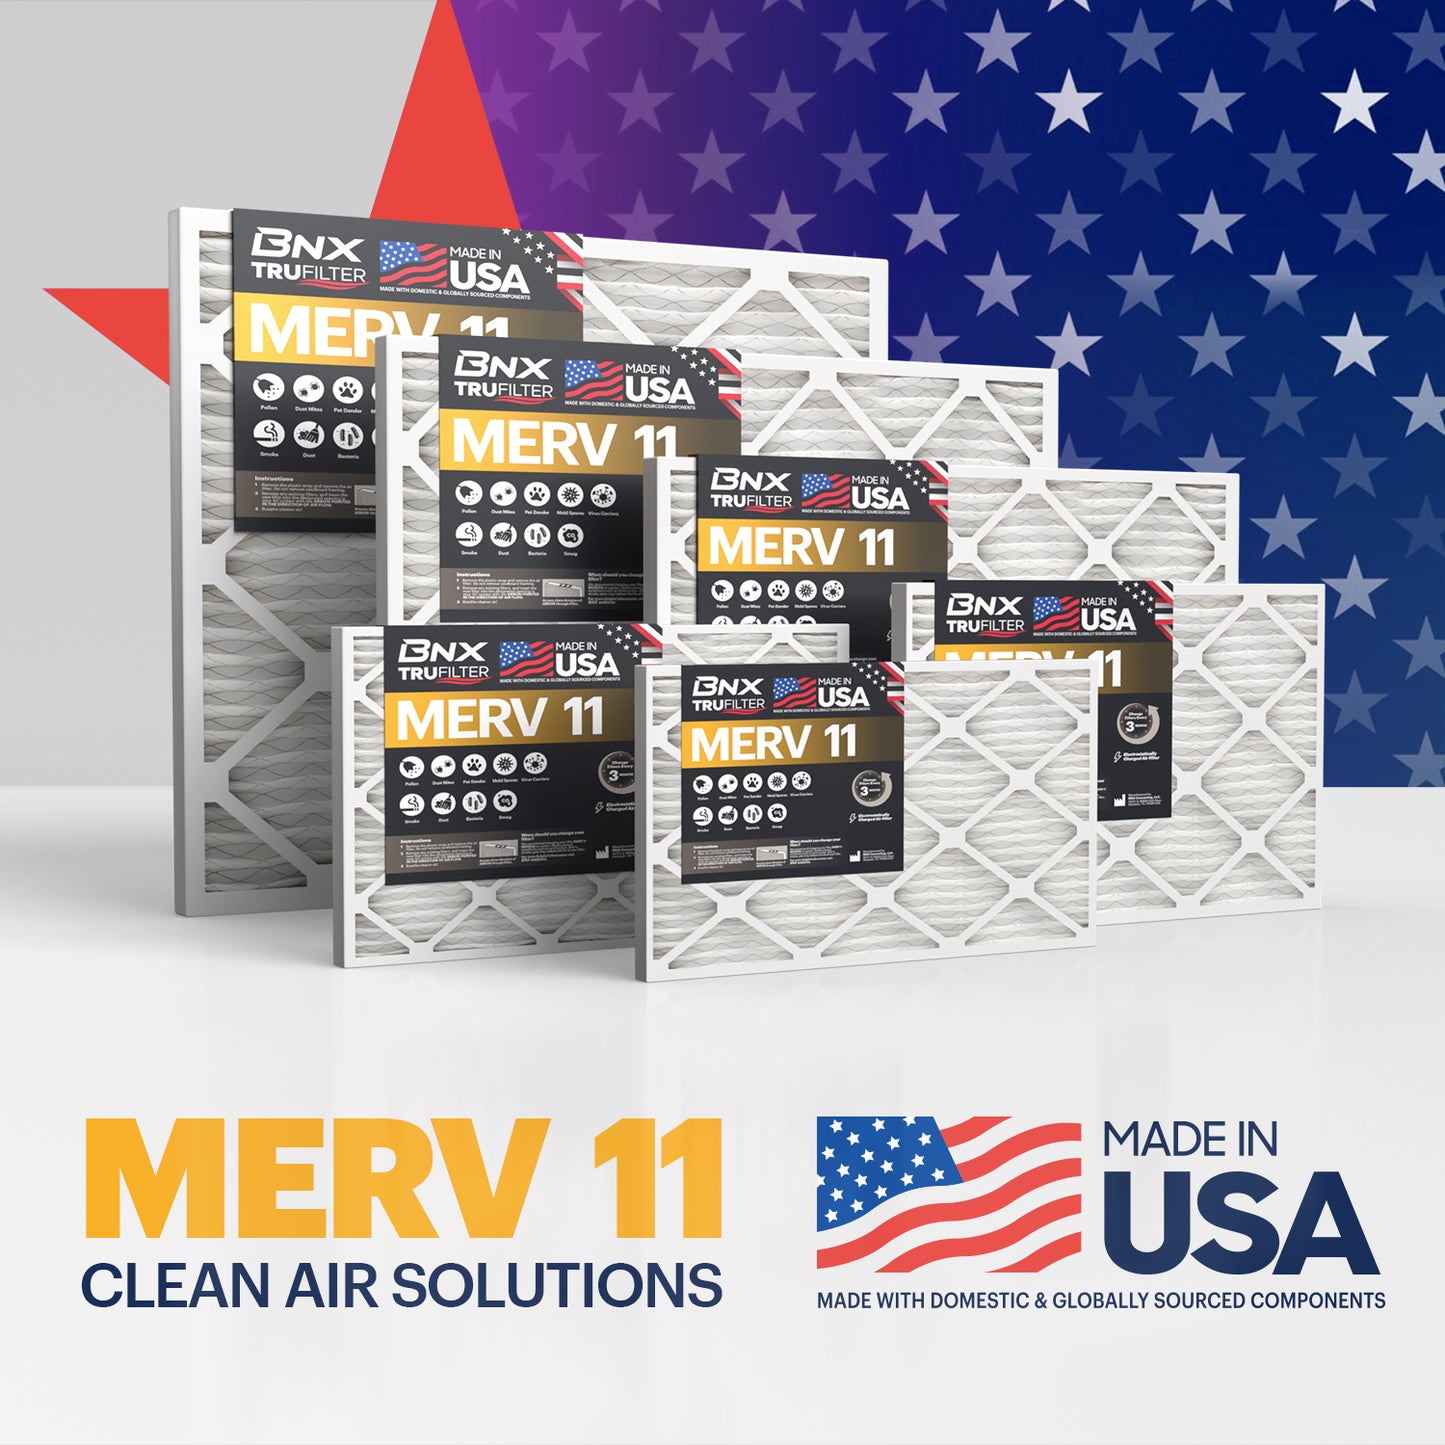 BNX TruFilter 18x20x1 Air Filter MERV 11 (6-Pack) - MADE IN USA - Allergen Defense Electrostatic Pleated Air Conditioner HVAC AC Furnace Filters for Allergies, Dust, Pet, Smoke, Allergy MPR 1200 FPR 7